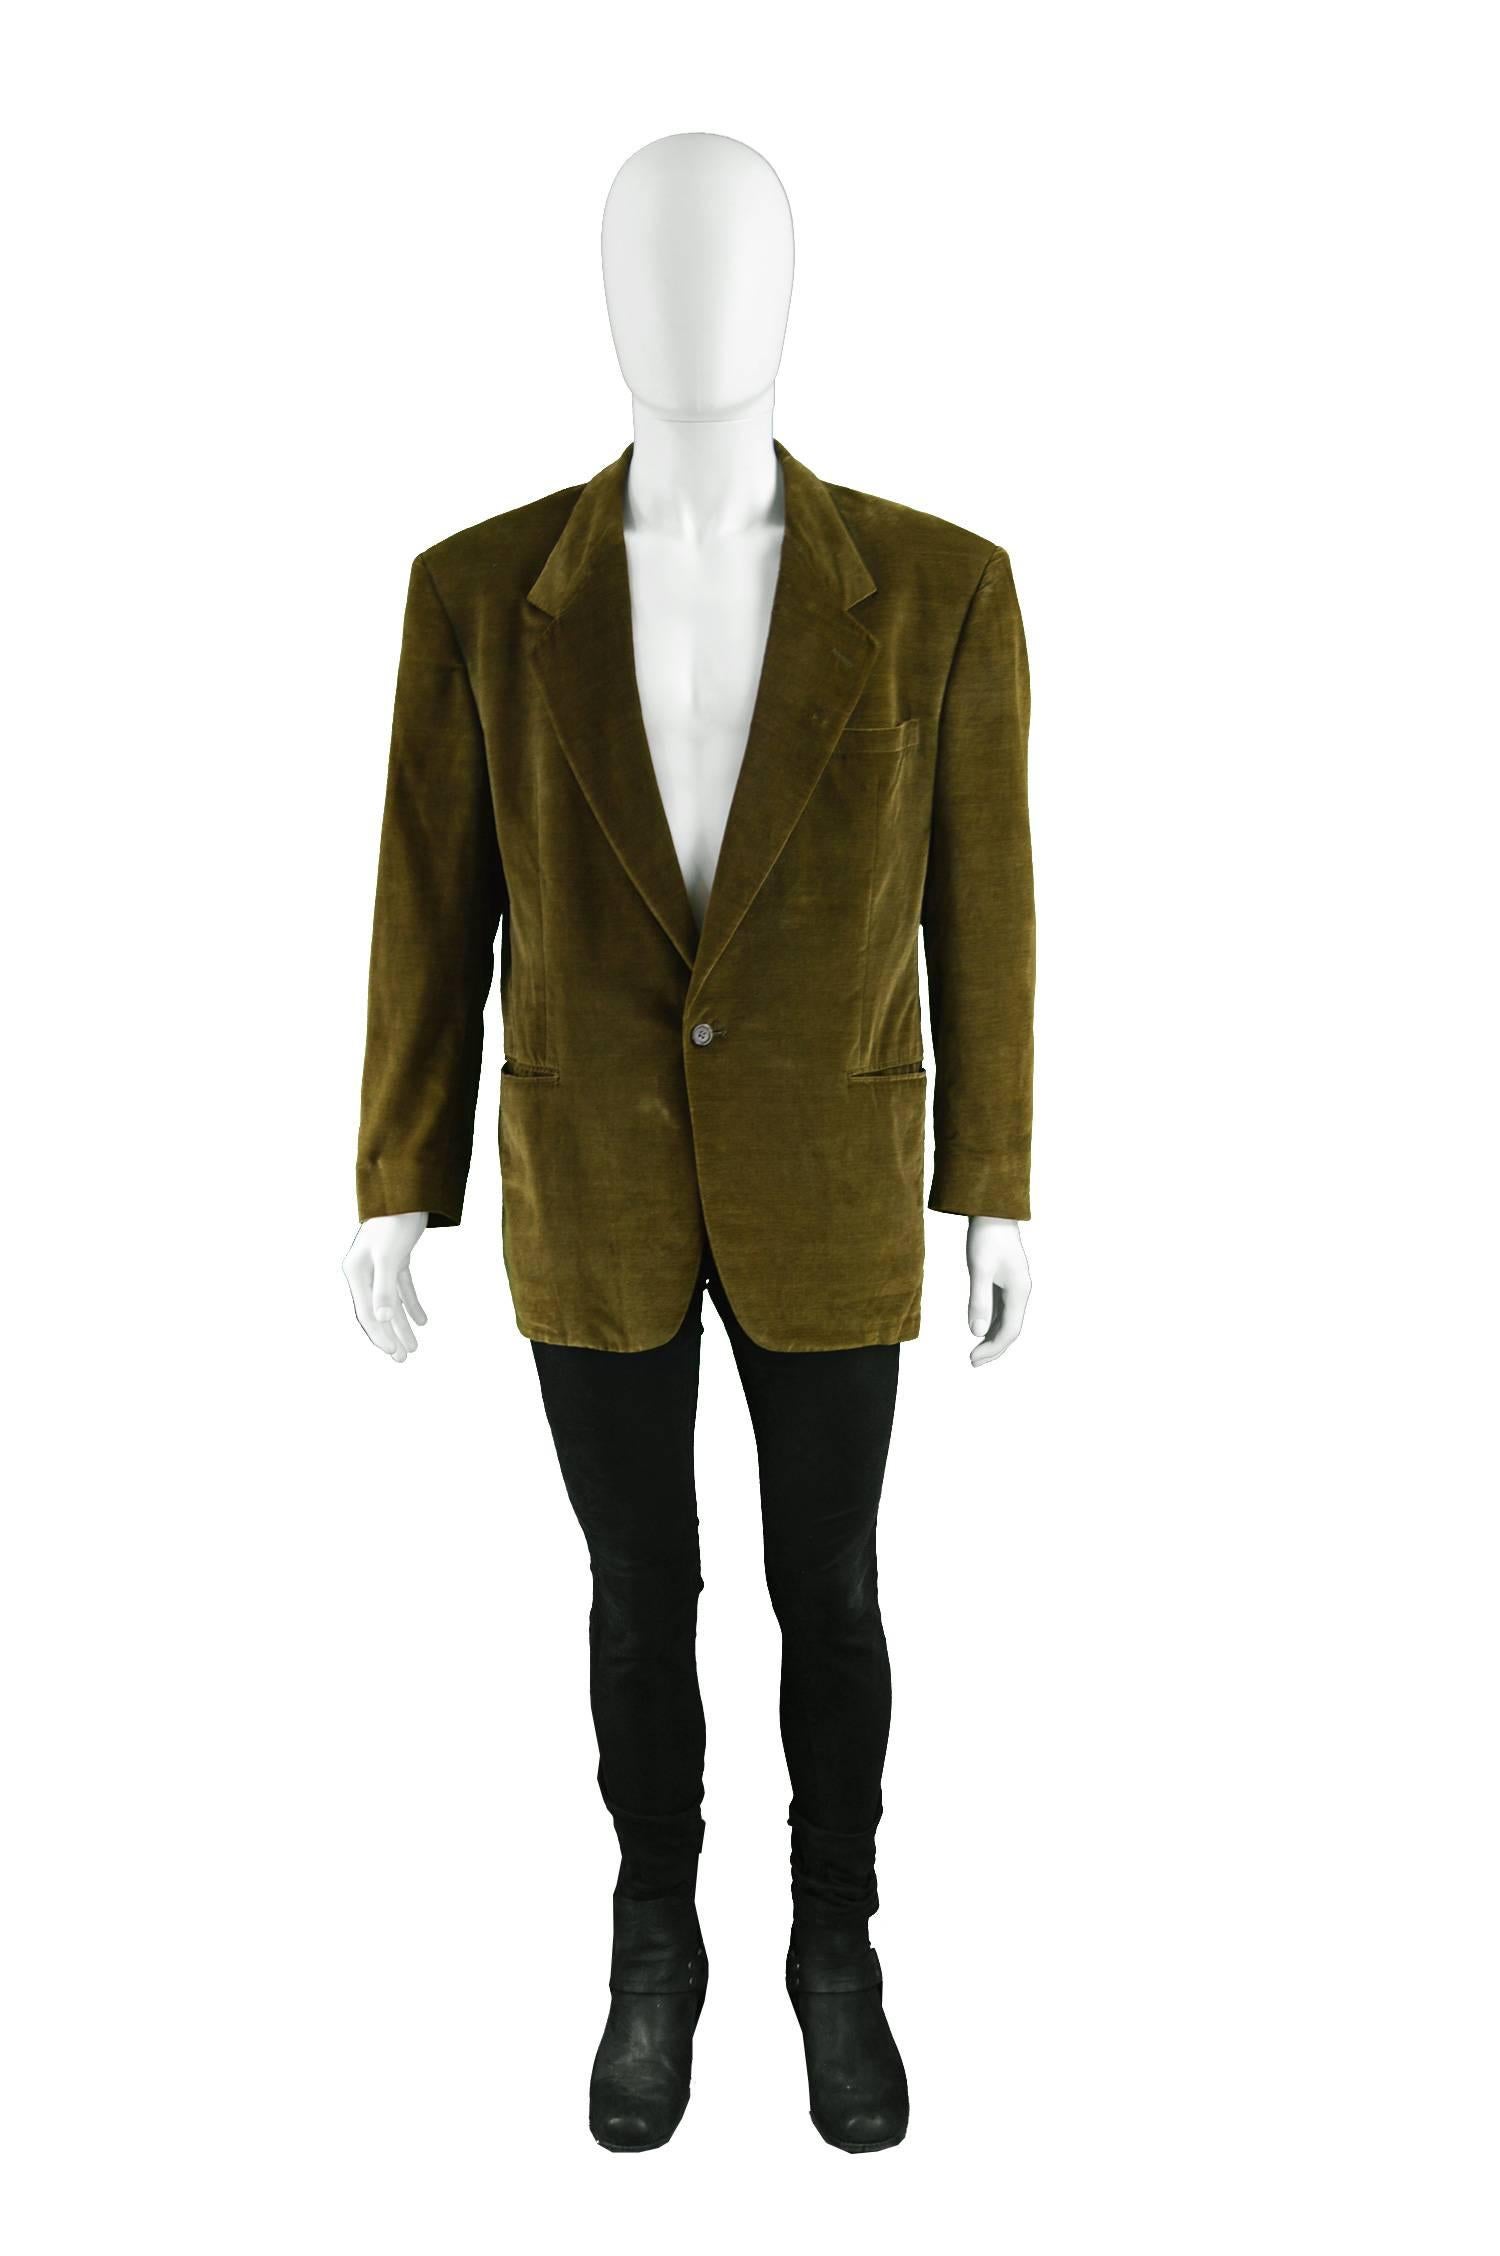 Gianni Versace Men's Vintage Brown Velvet Bold Shoulder Blazer Jacket, 1980s

Size: Marked 50 which is roughly a men's Large. Please check measurements.
Chest - 44” / 112cm (allow a couple of inches room for movement)
Waist - 40” / 101cm
Length